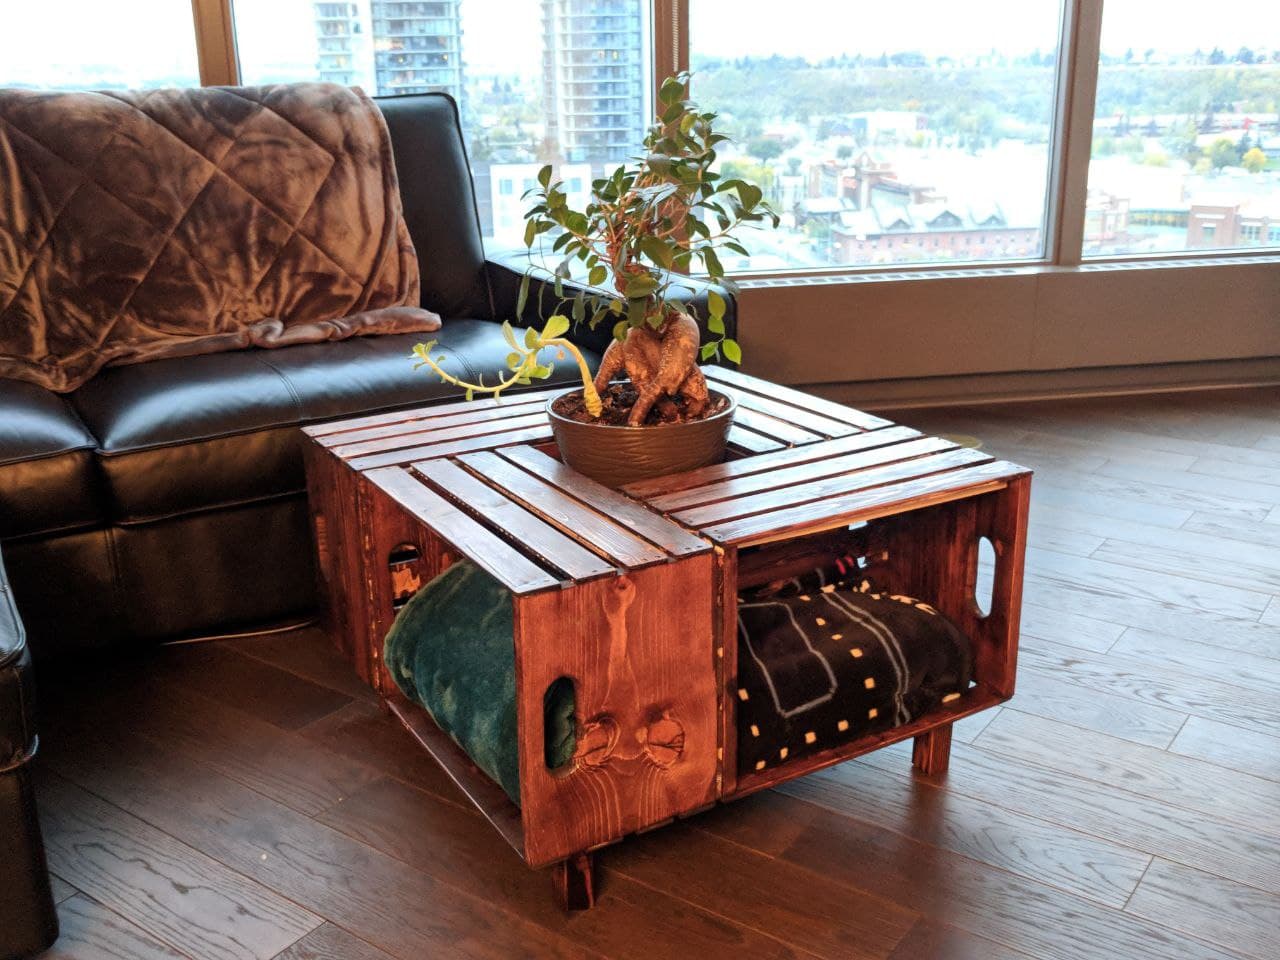 the table in my living room with blankets inside the wine crates and a plant pot in the centre growing a bonsai tree and a succulent